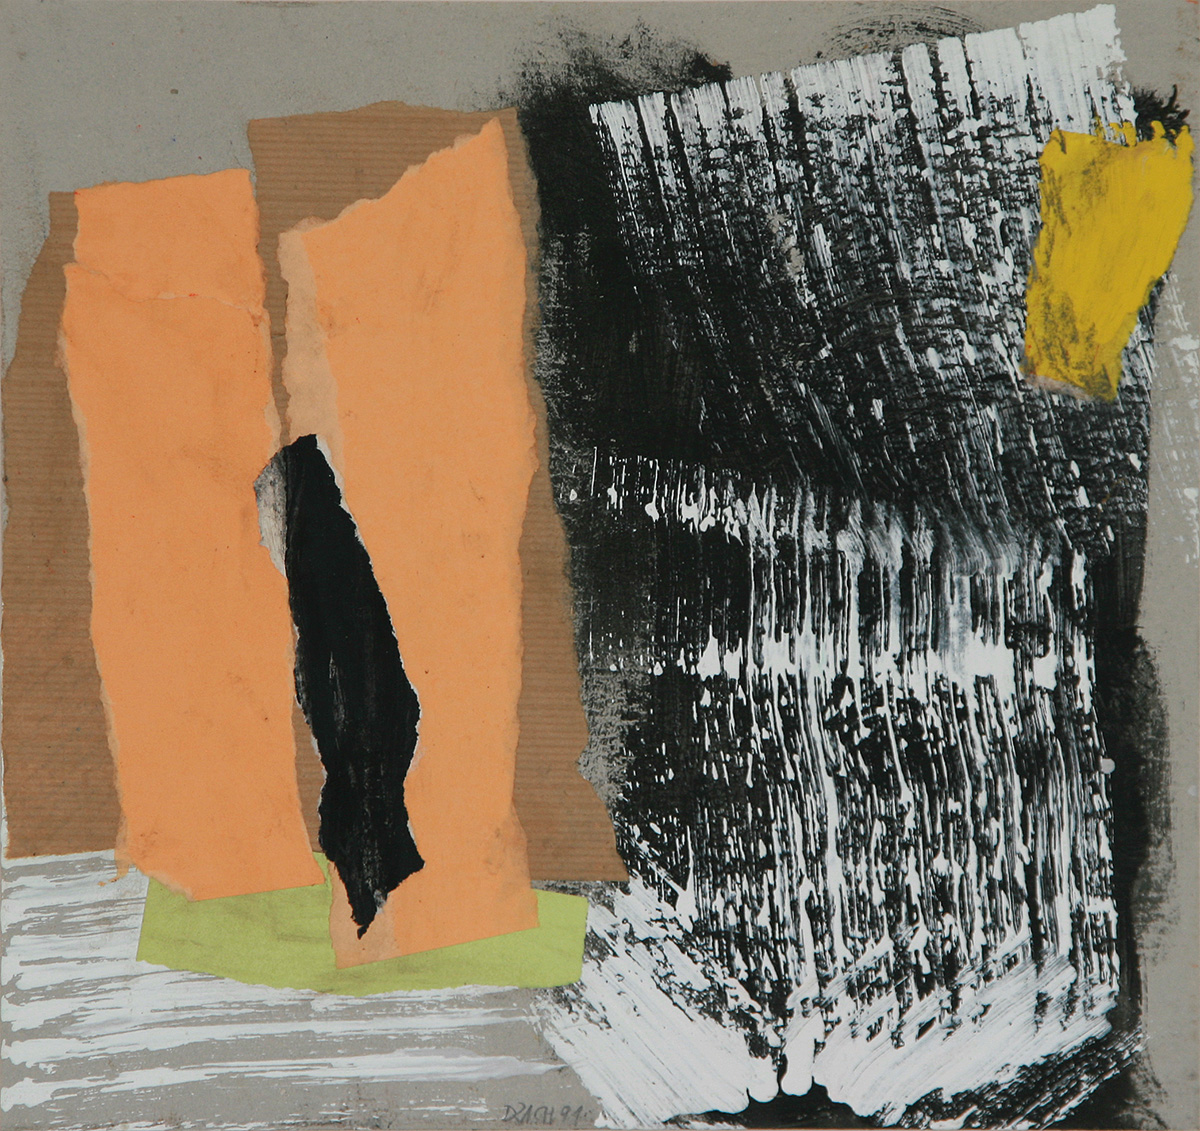 Ohne Titel, 199134,5 x 36,4 cmCollage, mixed media on cardboard